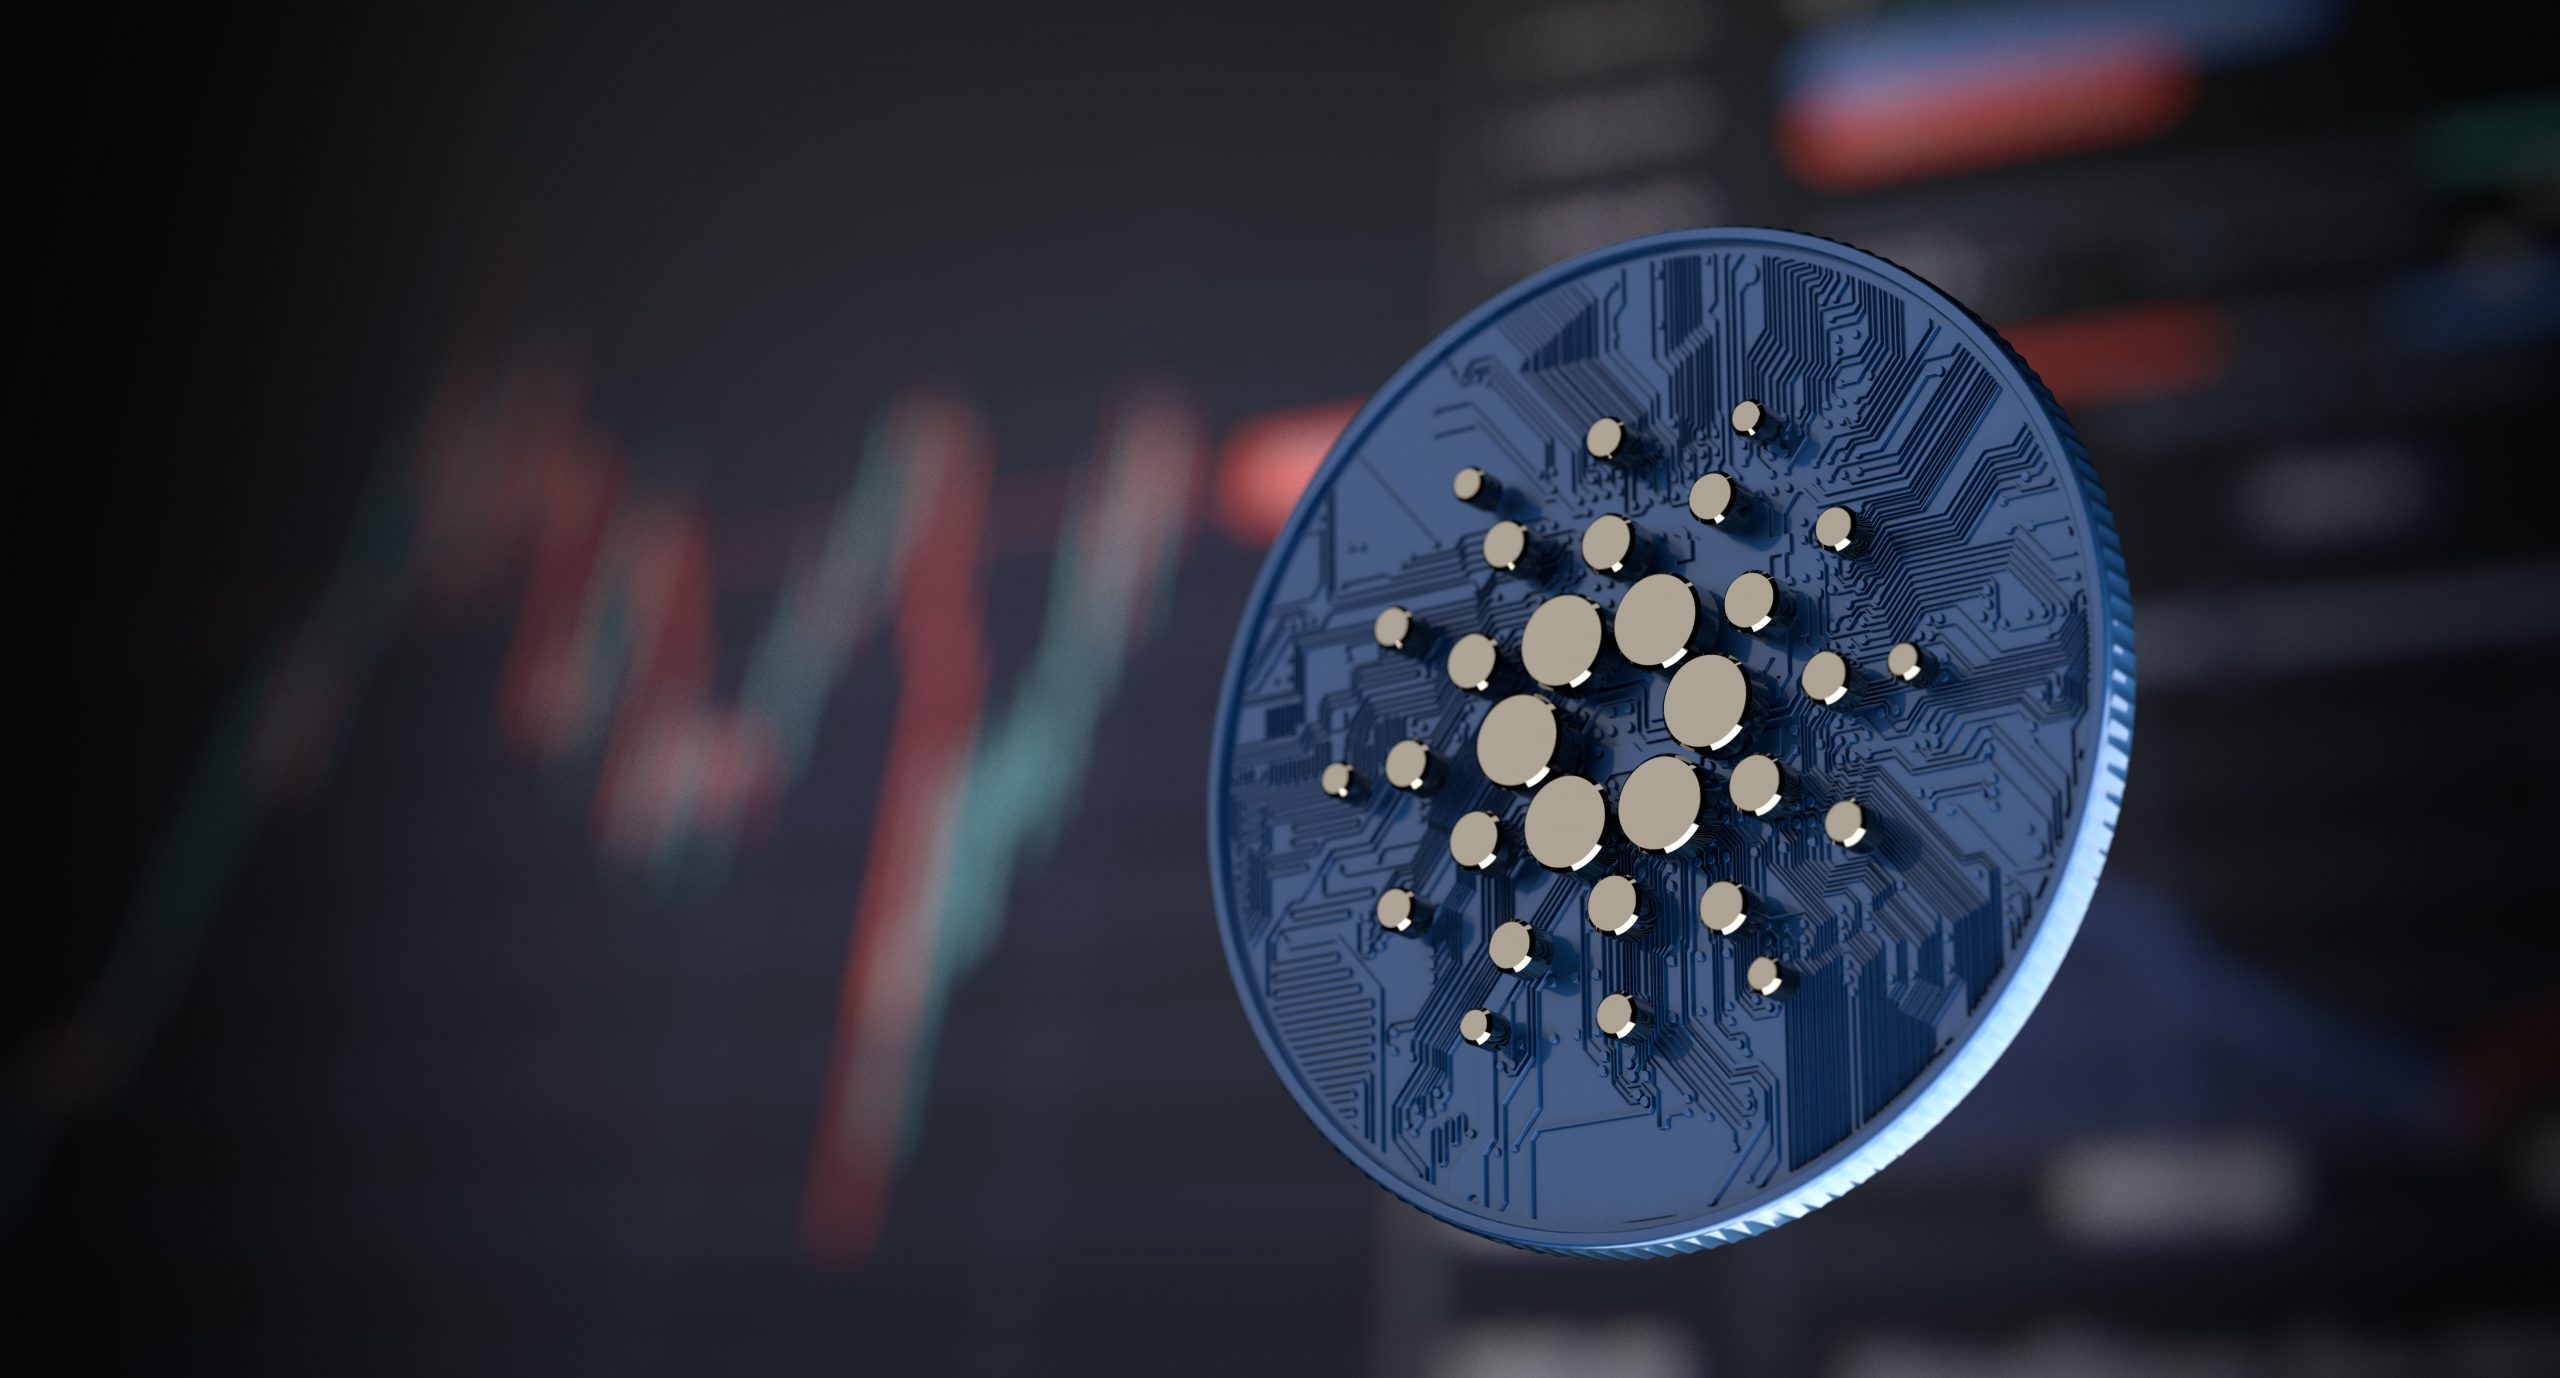 Cardano Ranked As The Third Most-Staked Cryptocurrency